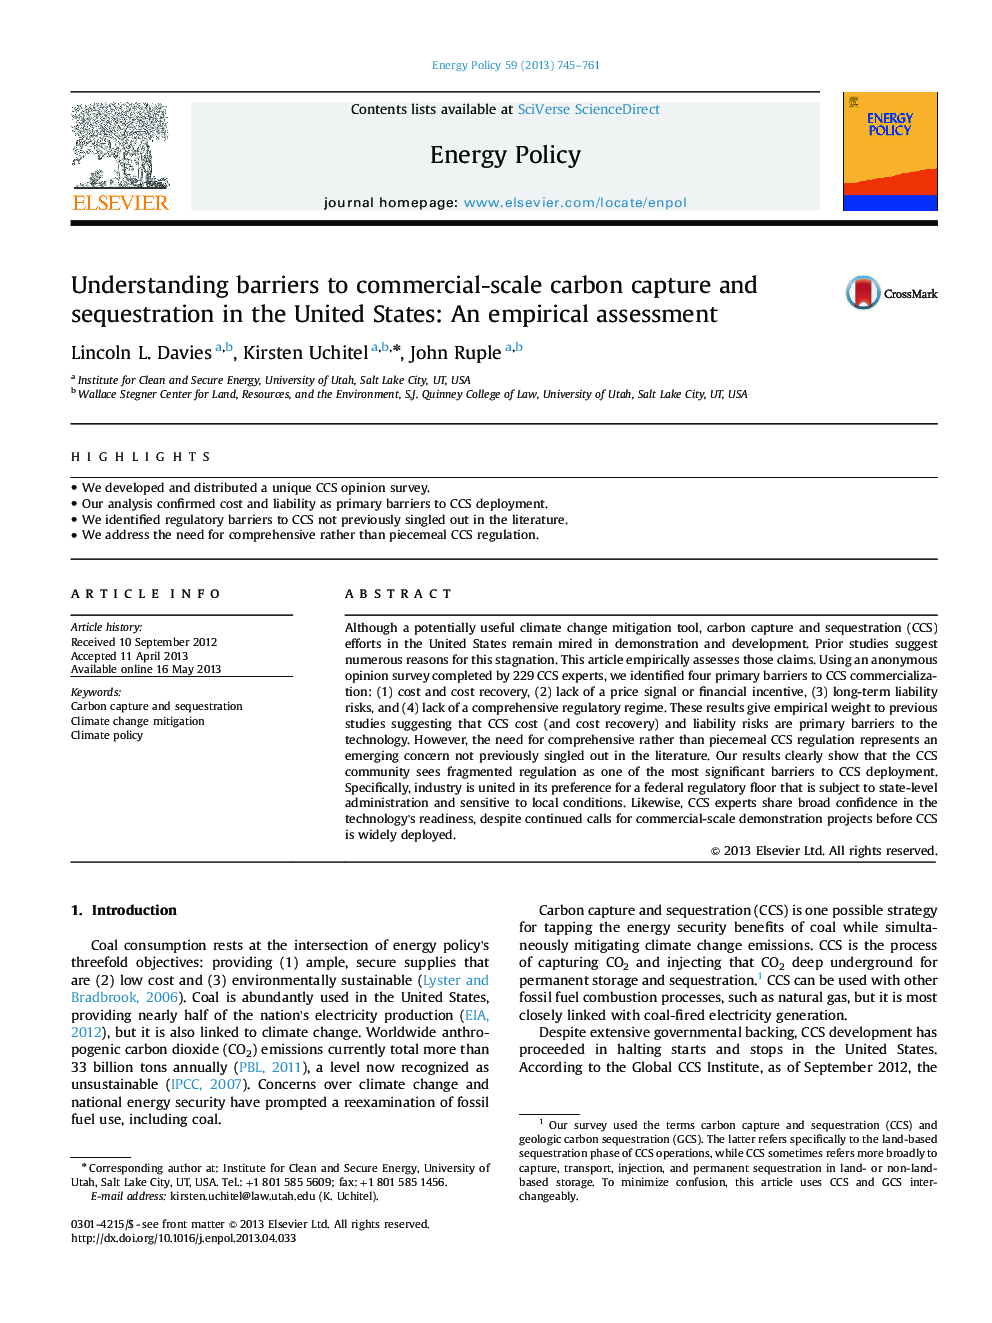 Understanding barriers to commercial-scale carbon capture and sequestration in the United States: An empirical assessment